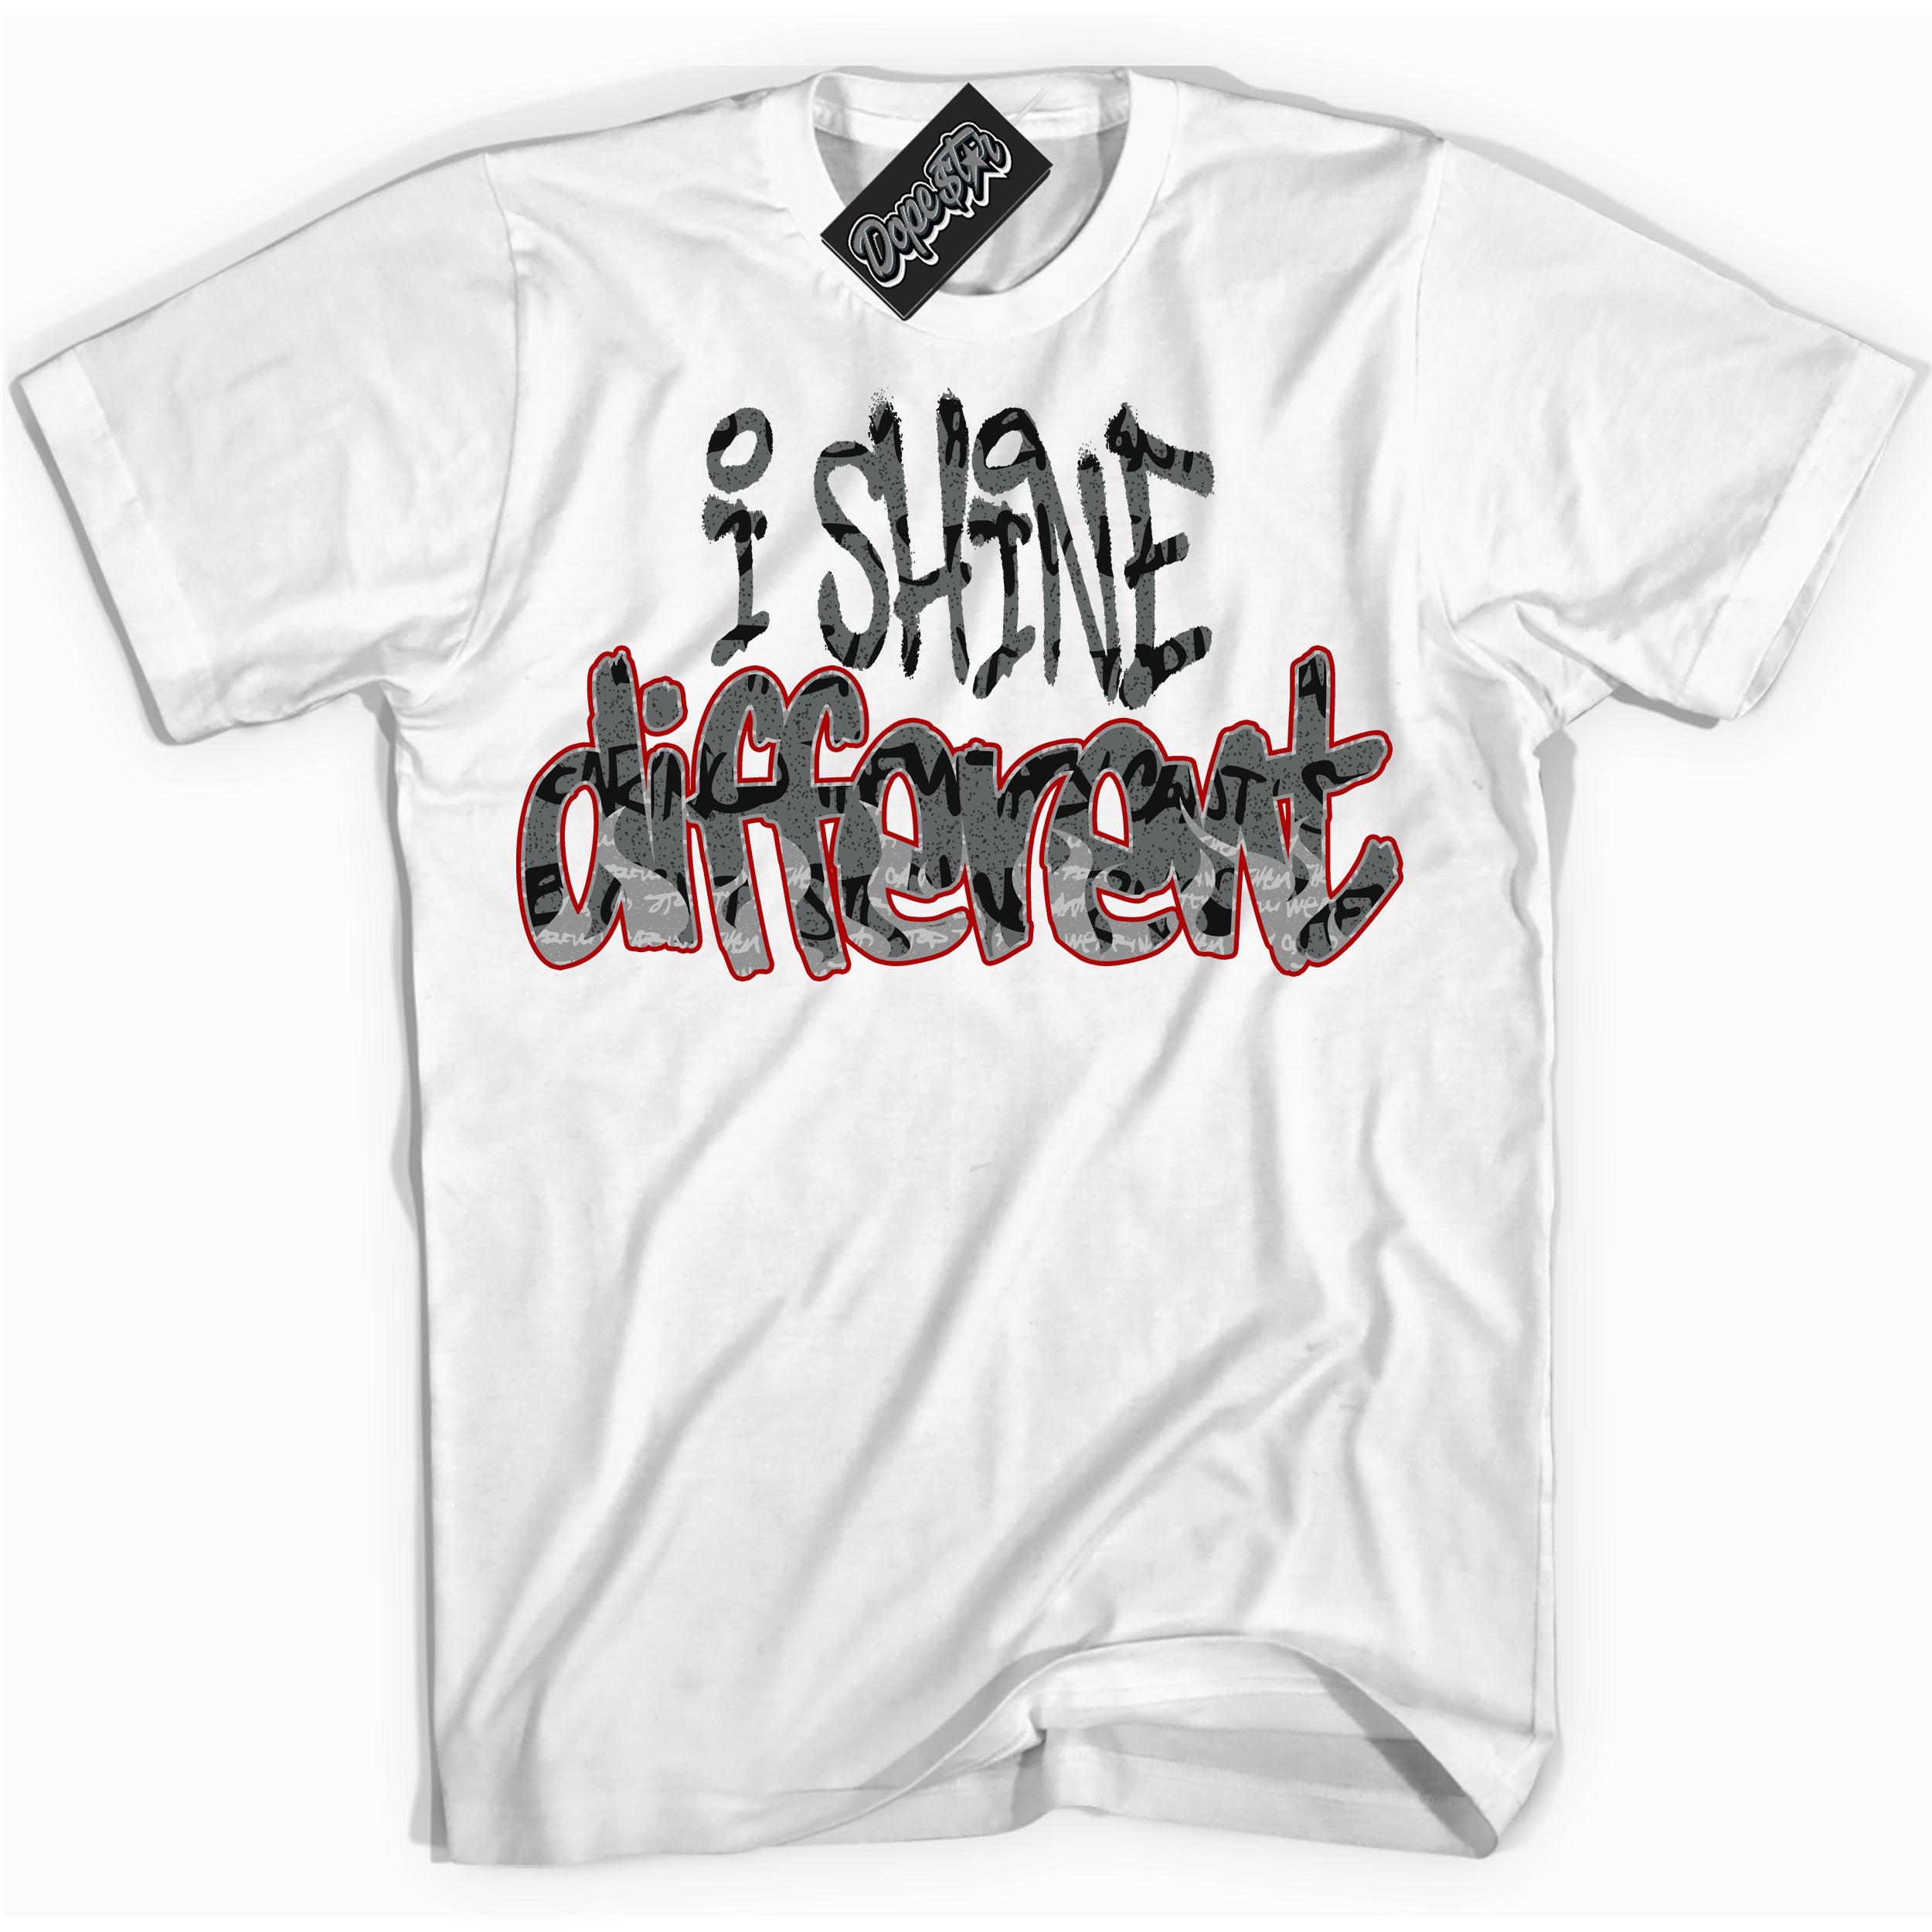 Cool White Shirt with “ I Shine Different ” design that perfectly matches Rebellionaire 1s Sneakers.